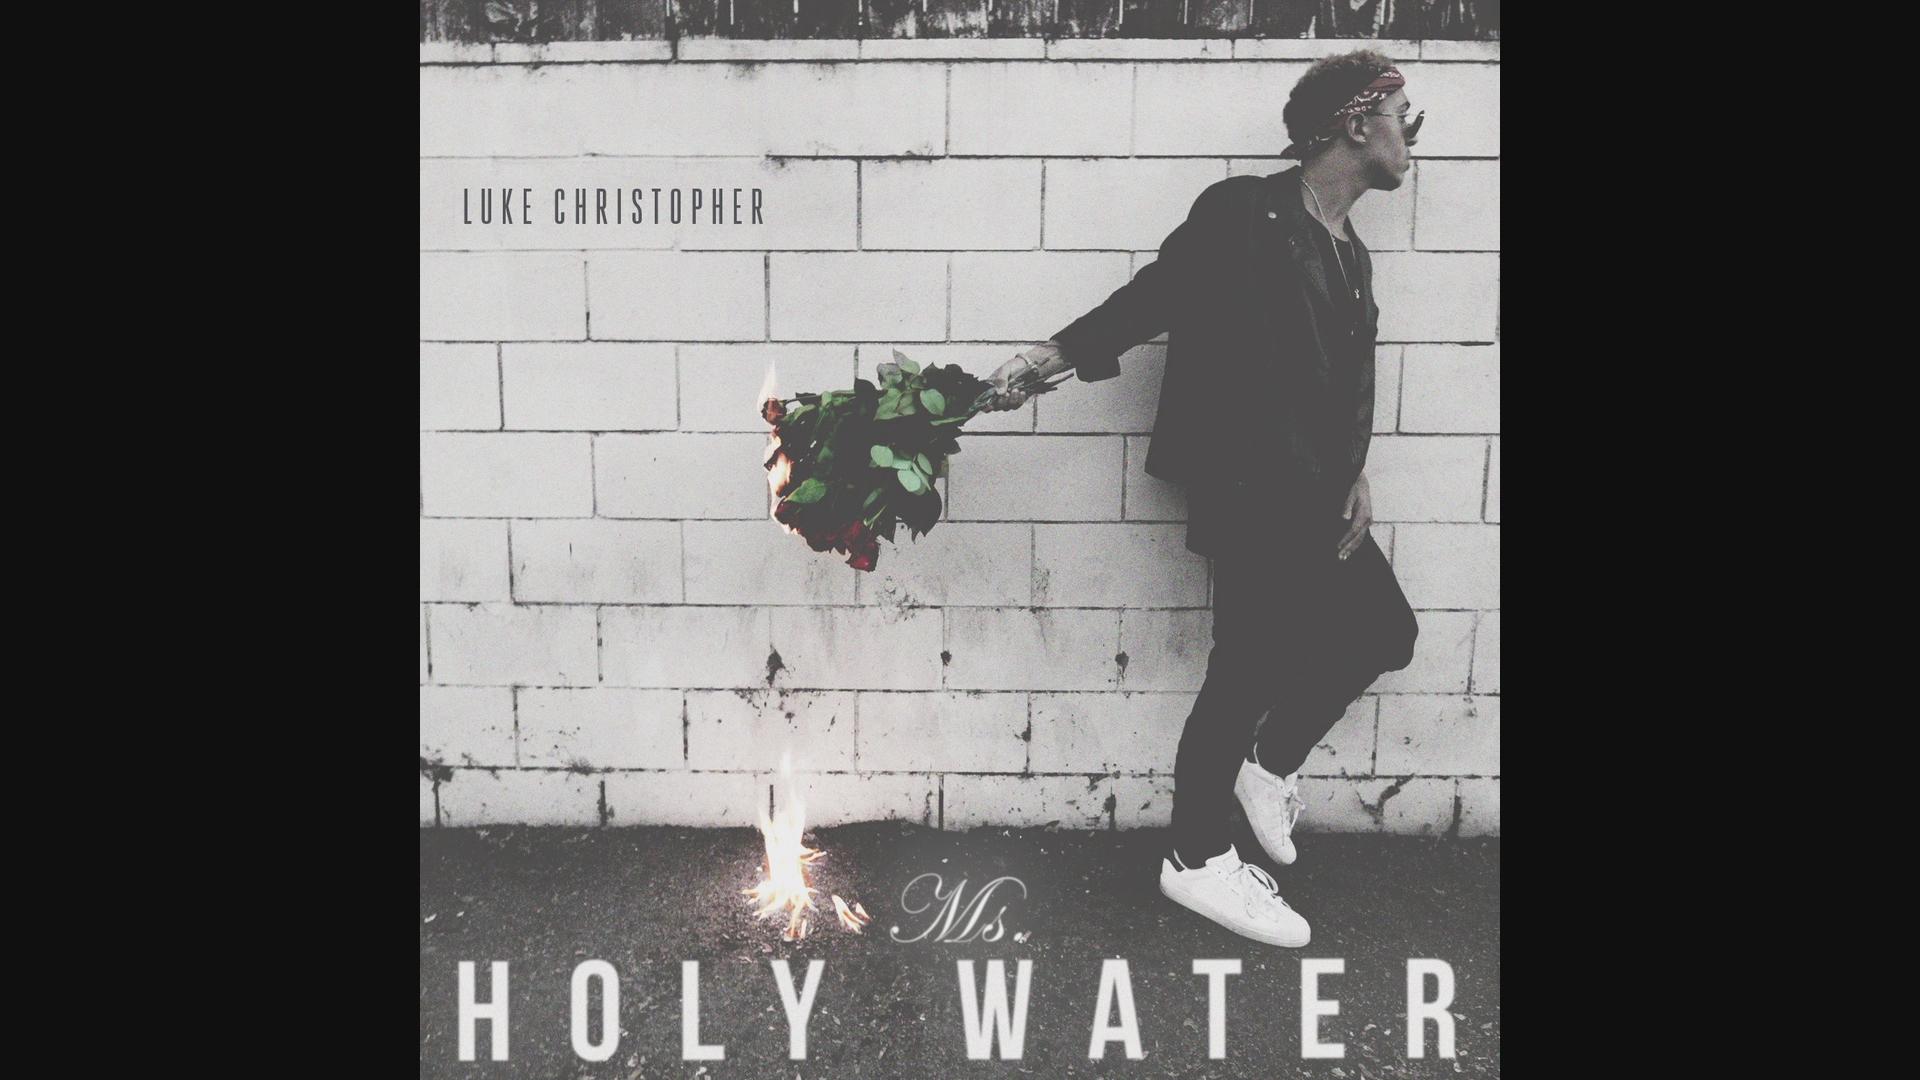 New Video: Luke Christopher "Ms. Holy Water"